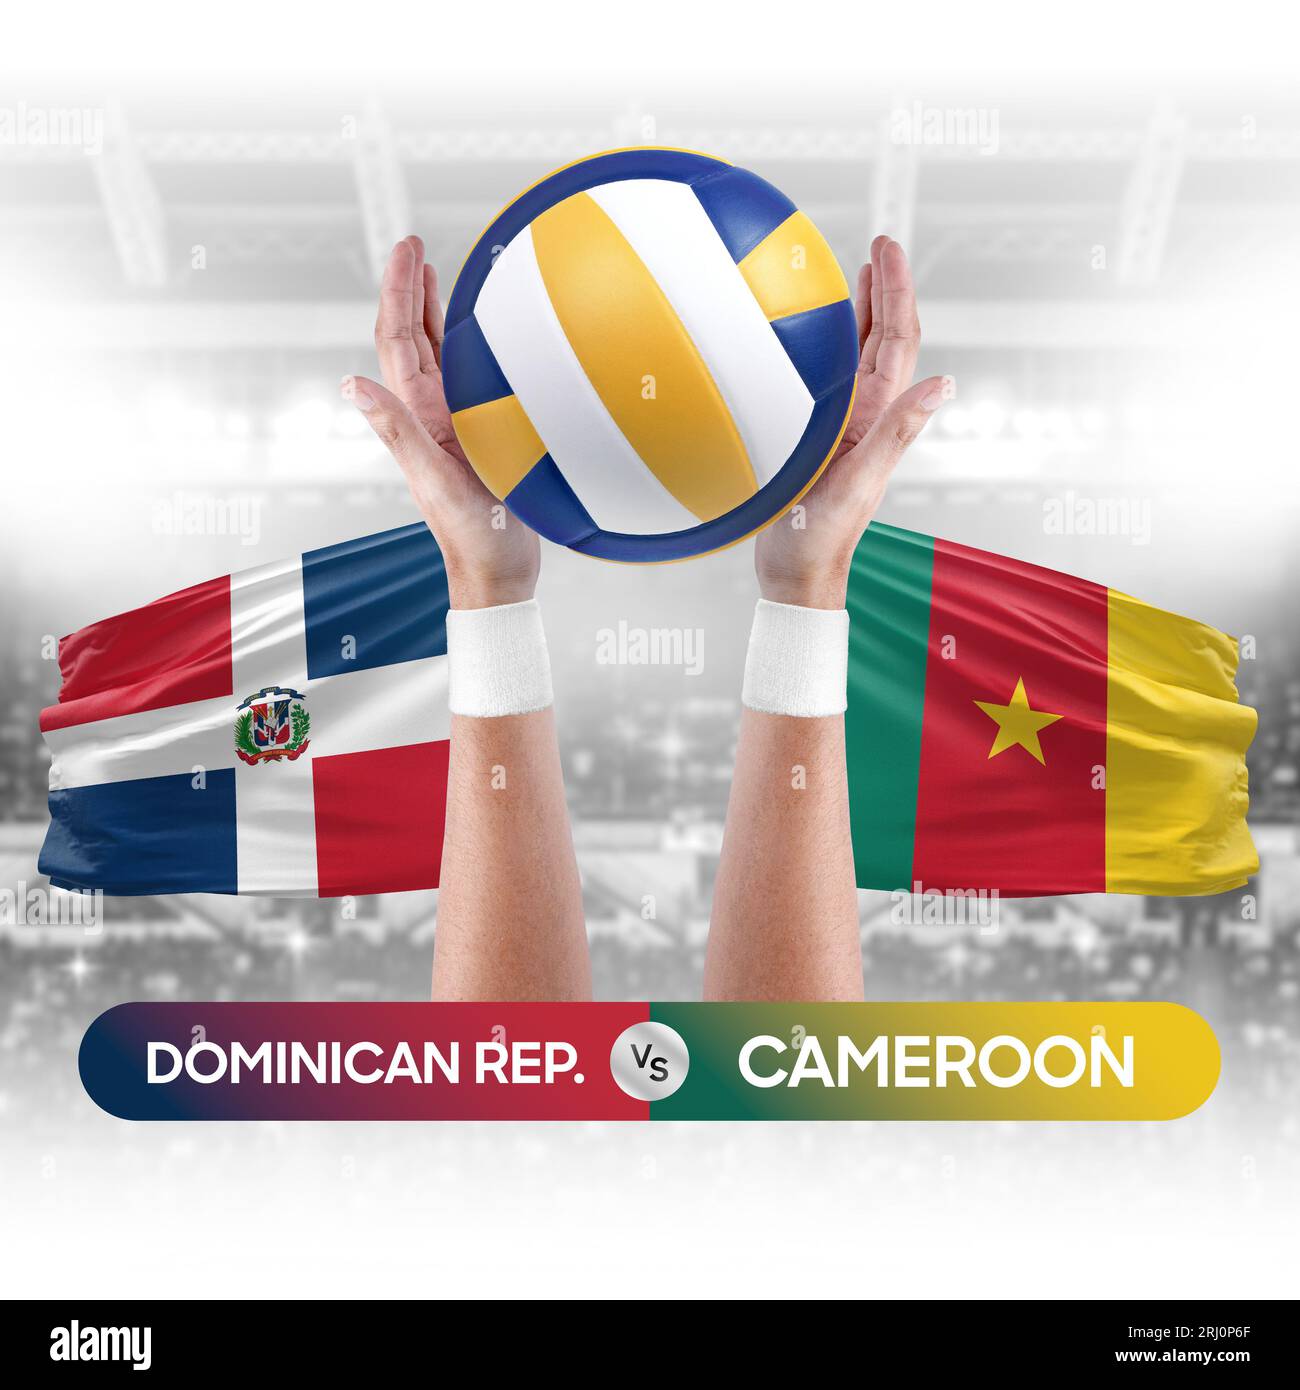 Dominican Republic vs Cameroon national teams volleyball volley ball match competition concept. Stock Photo